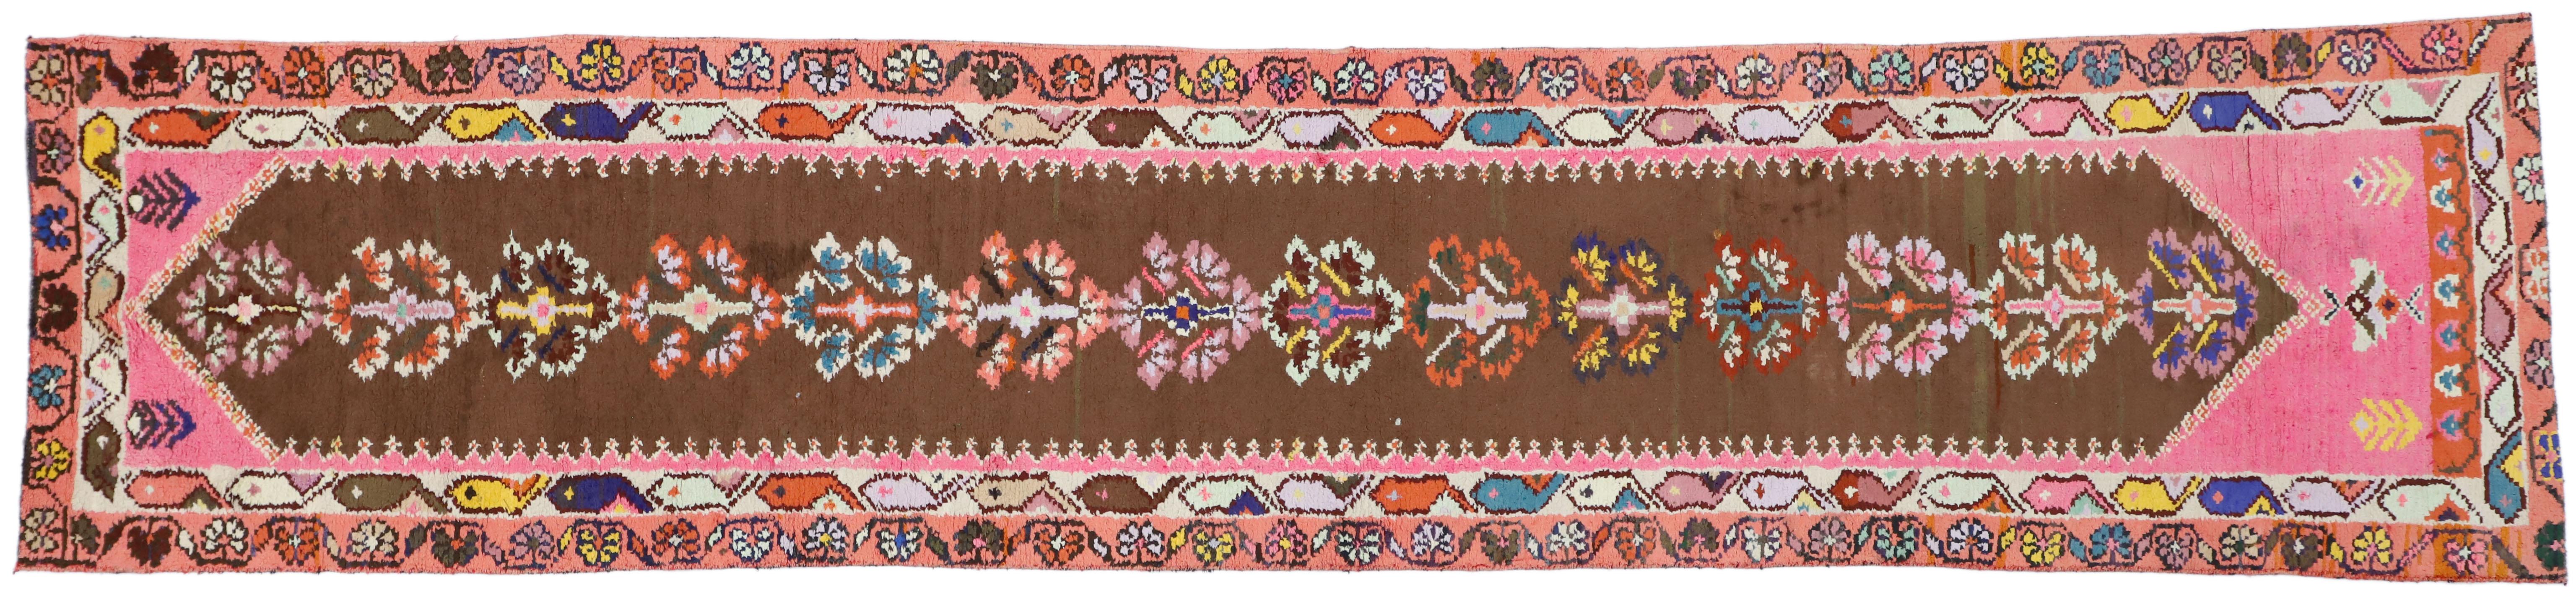 Vintage Turkish Oushak Runner with Eclectic Modern Mexican Frida Kahlo Style For Sale 3